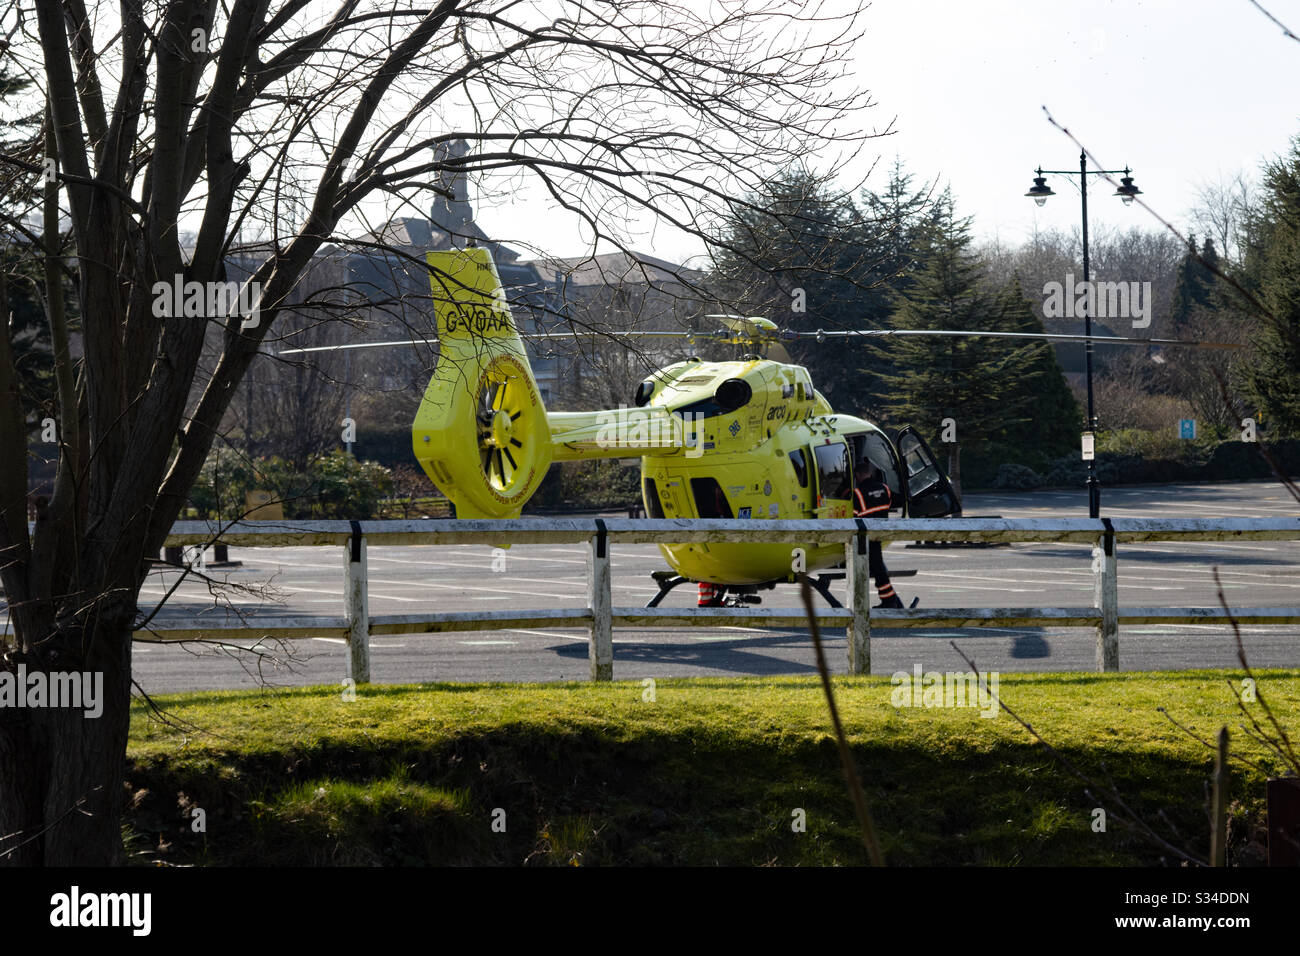 SHIPLEY, WY - 25/3/2020 - a Yorkshire Air Ambulance parked in a car park by the Airedale canal amid the Coronavirus (COVID-19) pandemic Stock Photo